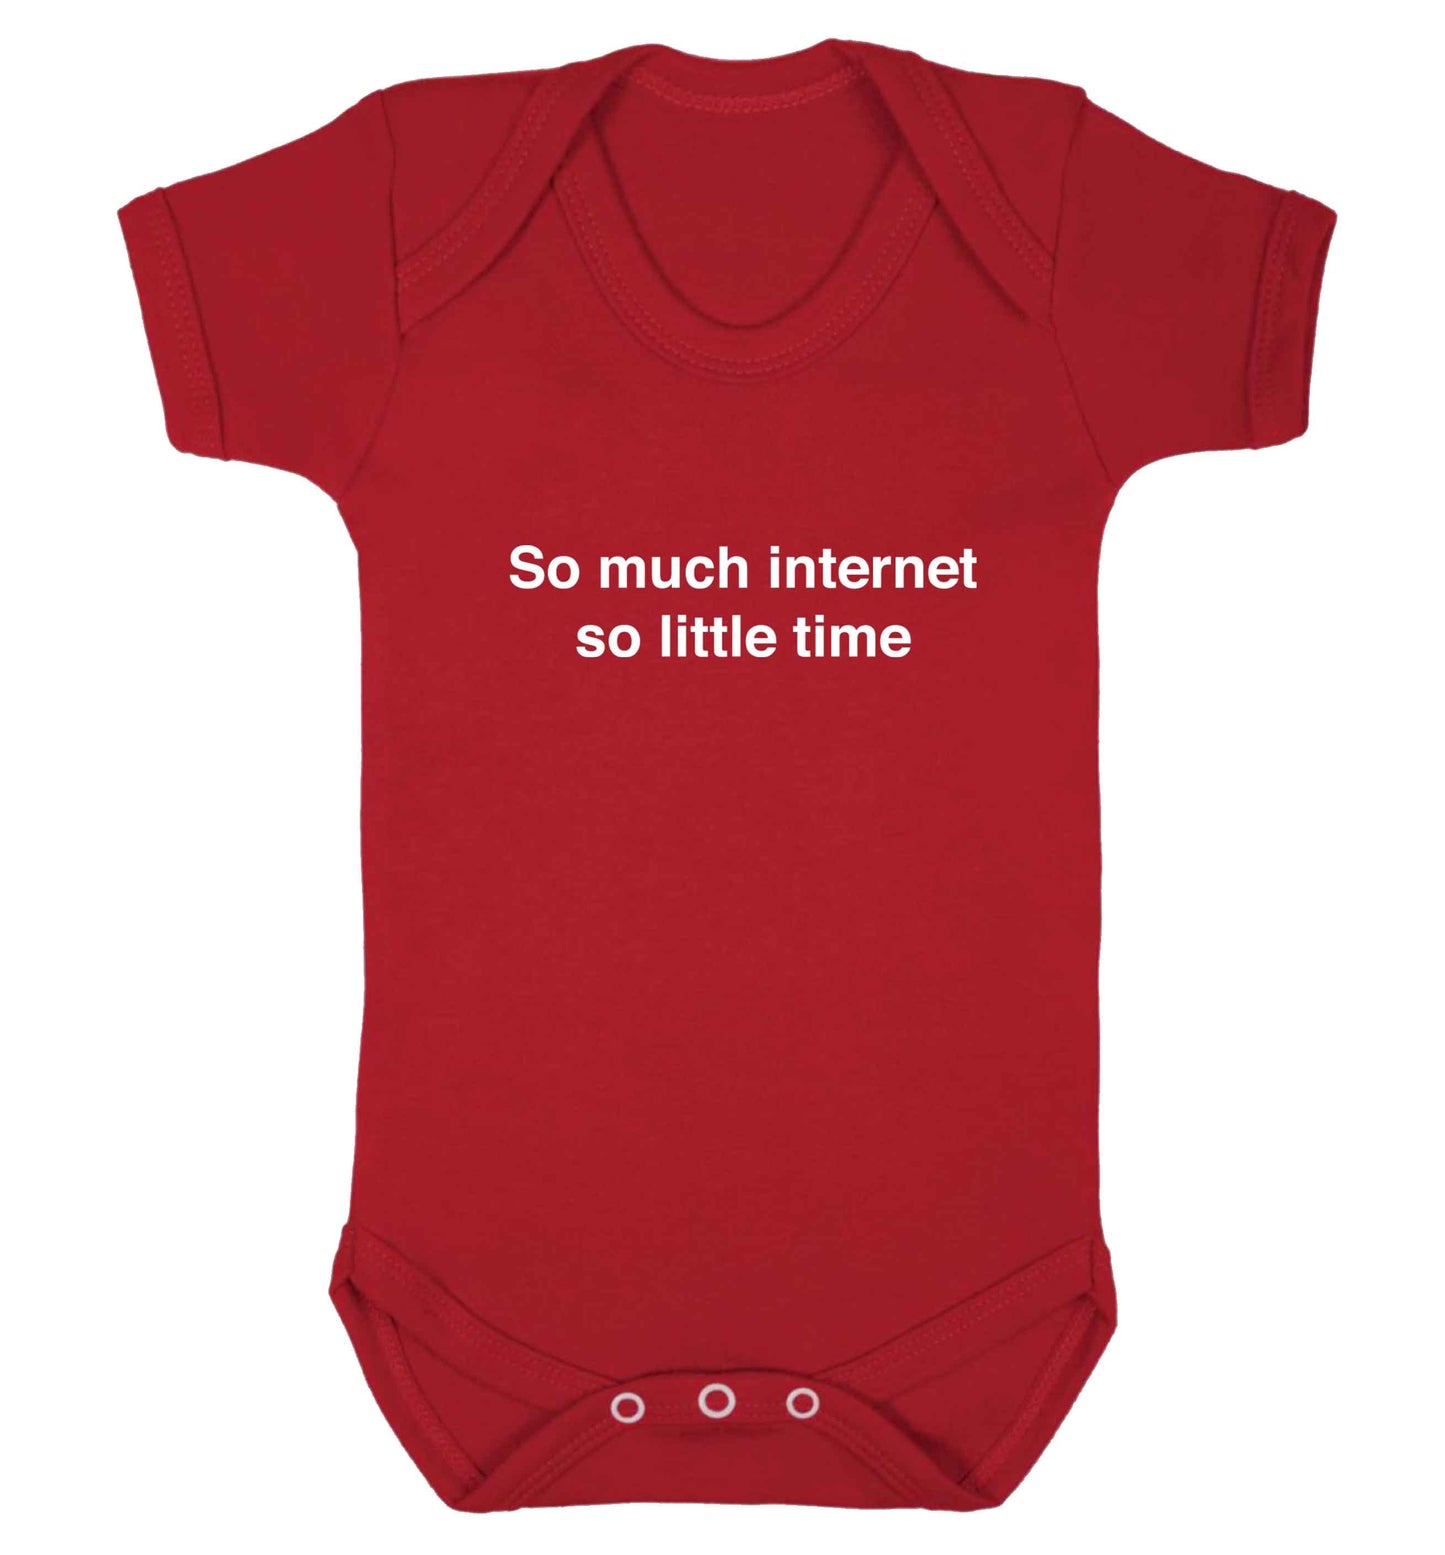 So much internet so little time baby vest red 18-24 months